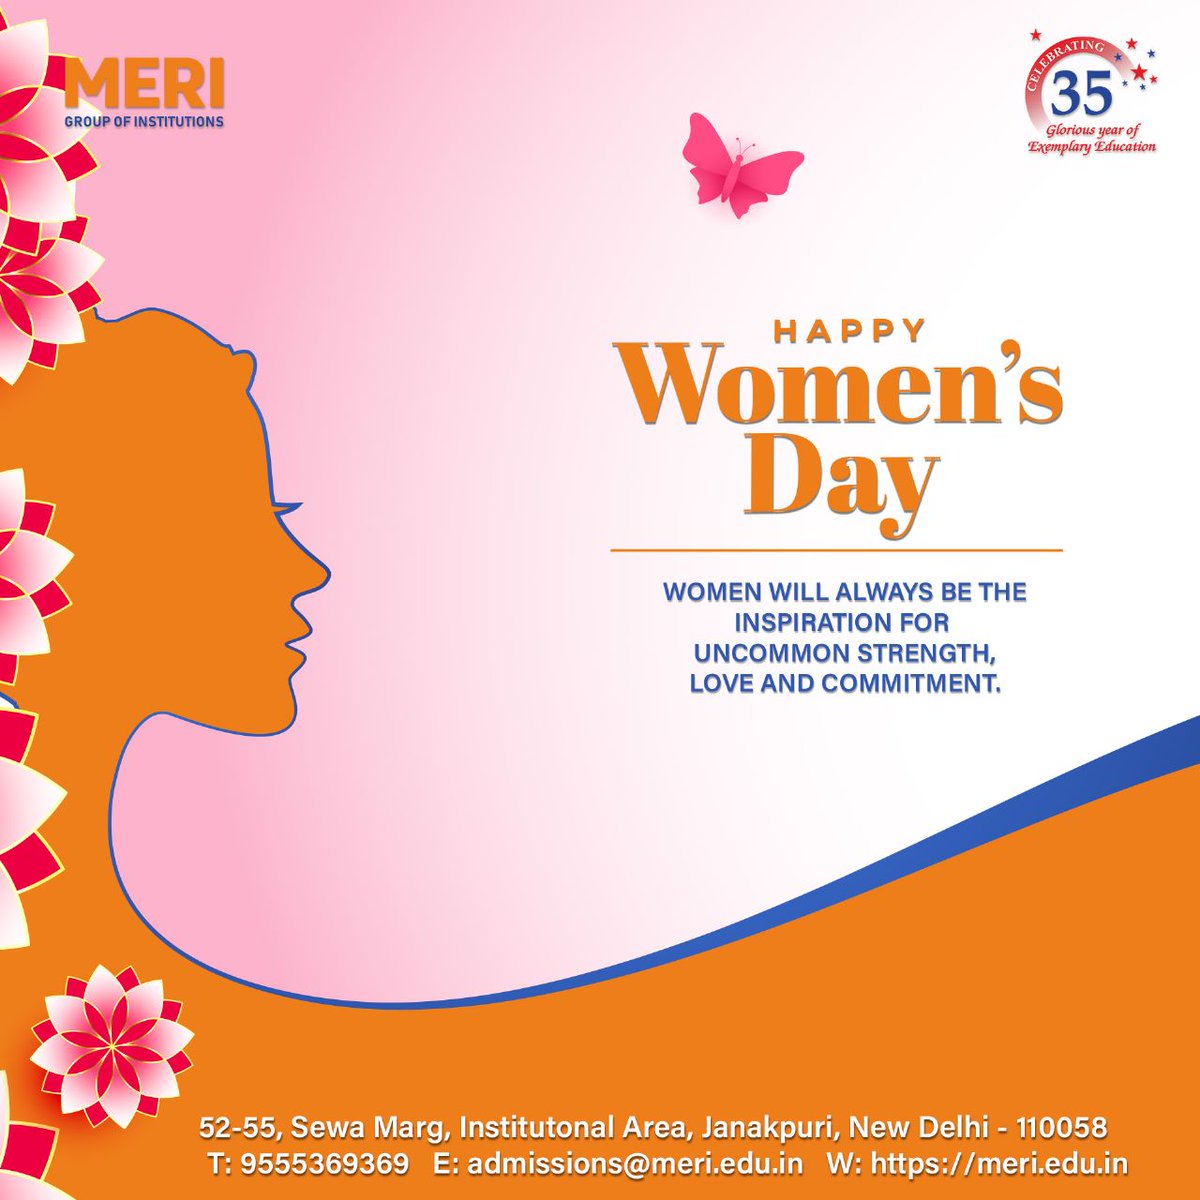 Happy women’s day to all the women out there! You are brave and strong, and you all deserve to be proud of yourselves.

#happywomensday2023 #womensday2023 #womensdaycelebration  #MERICampus #MERICollege #MERIGroup #IPUniversity #MDUniversity #proudmoments #ManagementCollege